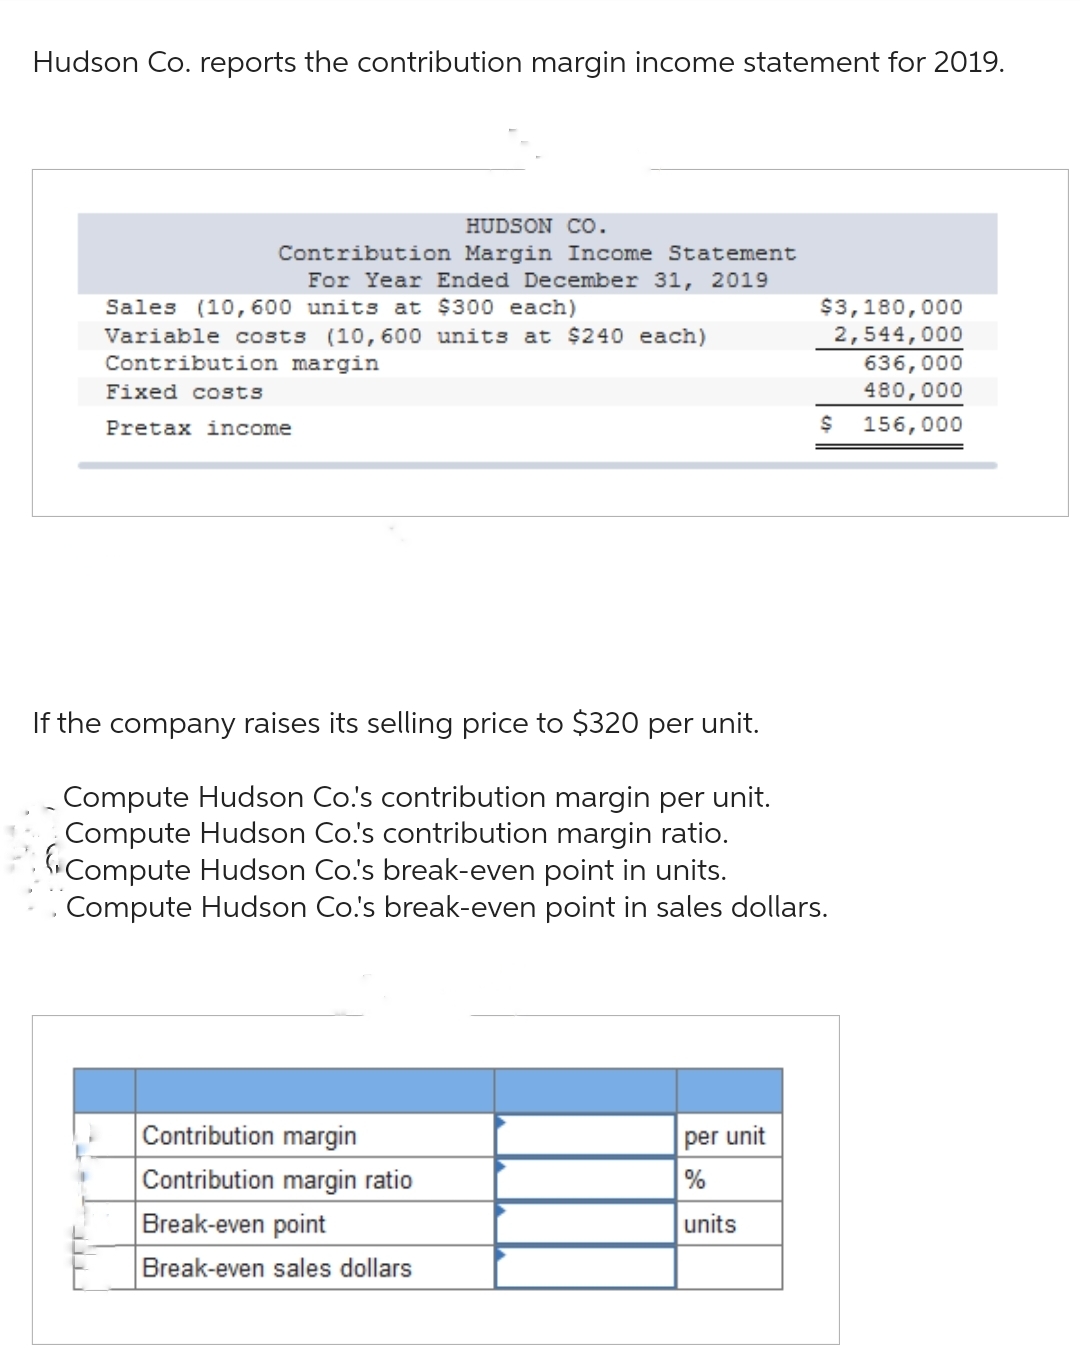 Hudson Co. reports the contribution margin income statement for 2019.
HUDSON CO.
Contribution Margin Income Statement
Sales (10,600 units at $300 each)
Variable costs (10,600 units at $240 each)
Contribution margin
Fixed costs
Pretax income
For Year Ended December 31, 2019
$3,180,000
2,544,000
636,000
480,000
$
156,000
If the company raises its selling price to $320 per unit.
Compute Hudson Co.'s contribution margin per unit.
Compute Hudson Co.'s contribution margin ratio.
Compute Hudson Co.'s break-even point in units.
Compute Hudson Co.'s break-even point in sales dollars.
Contribution margin
per unit
Contribution margin ratio
%
Break-even point
units
Break-even sales dollars